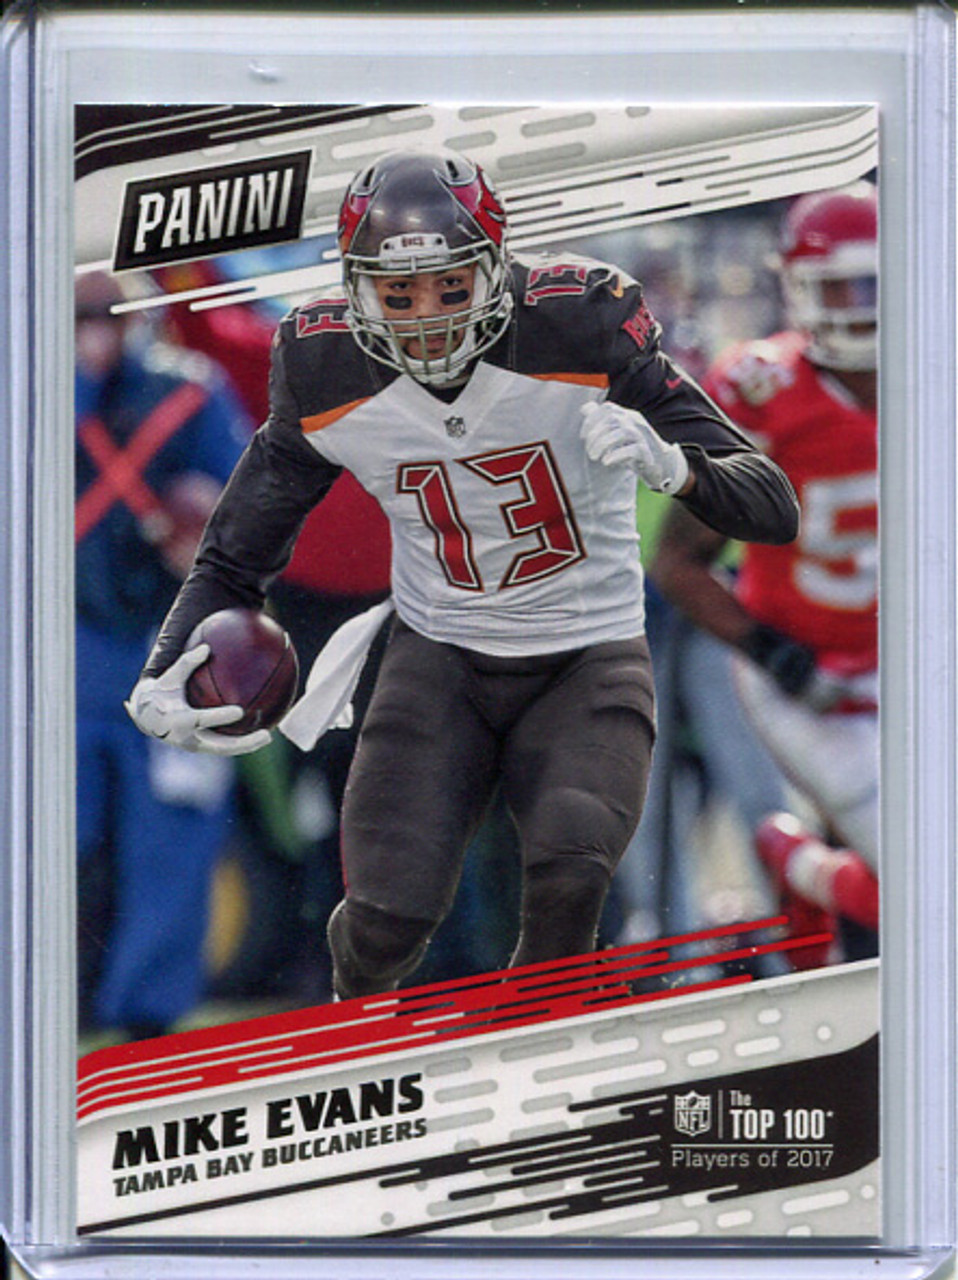 Mike Evans 2017 Panini Day #29